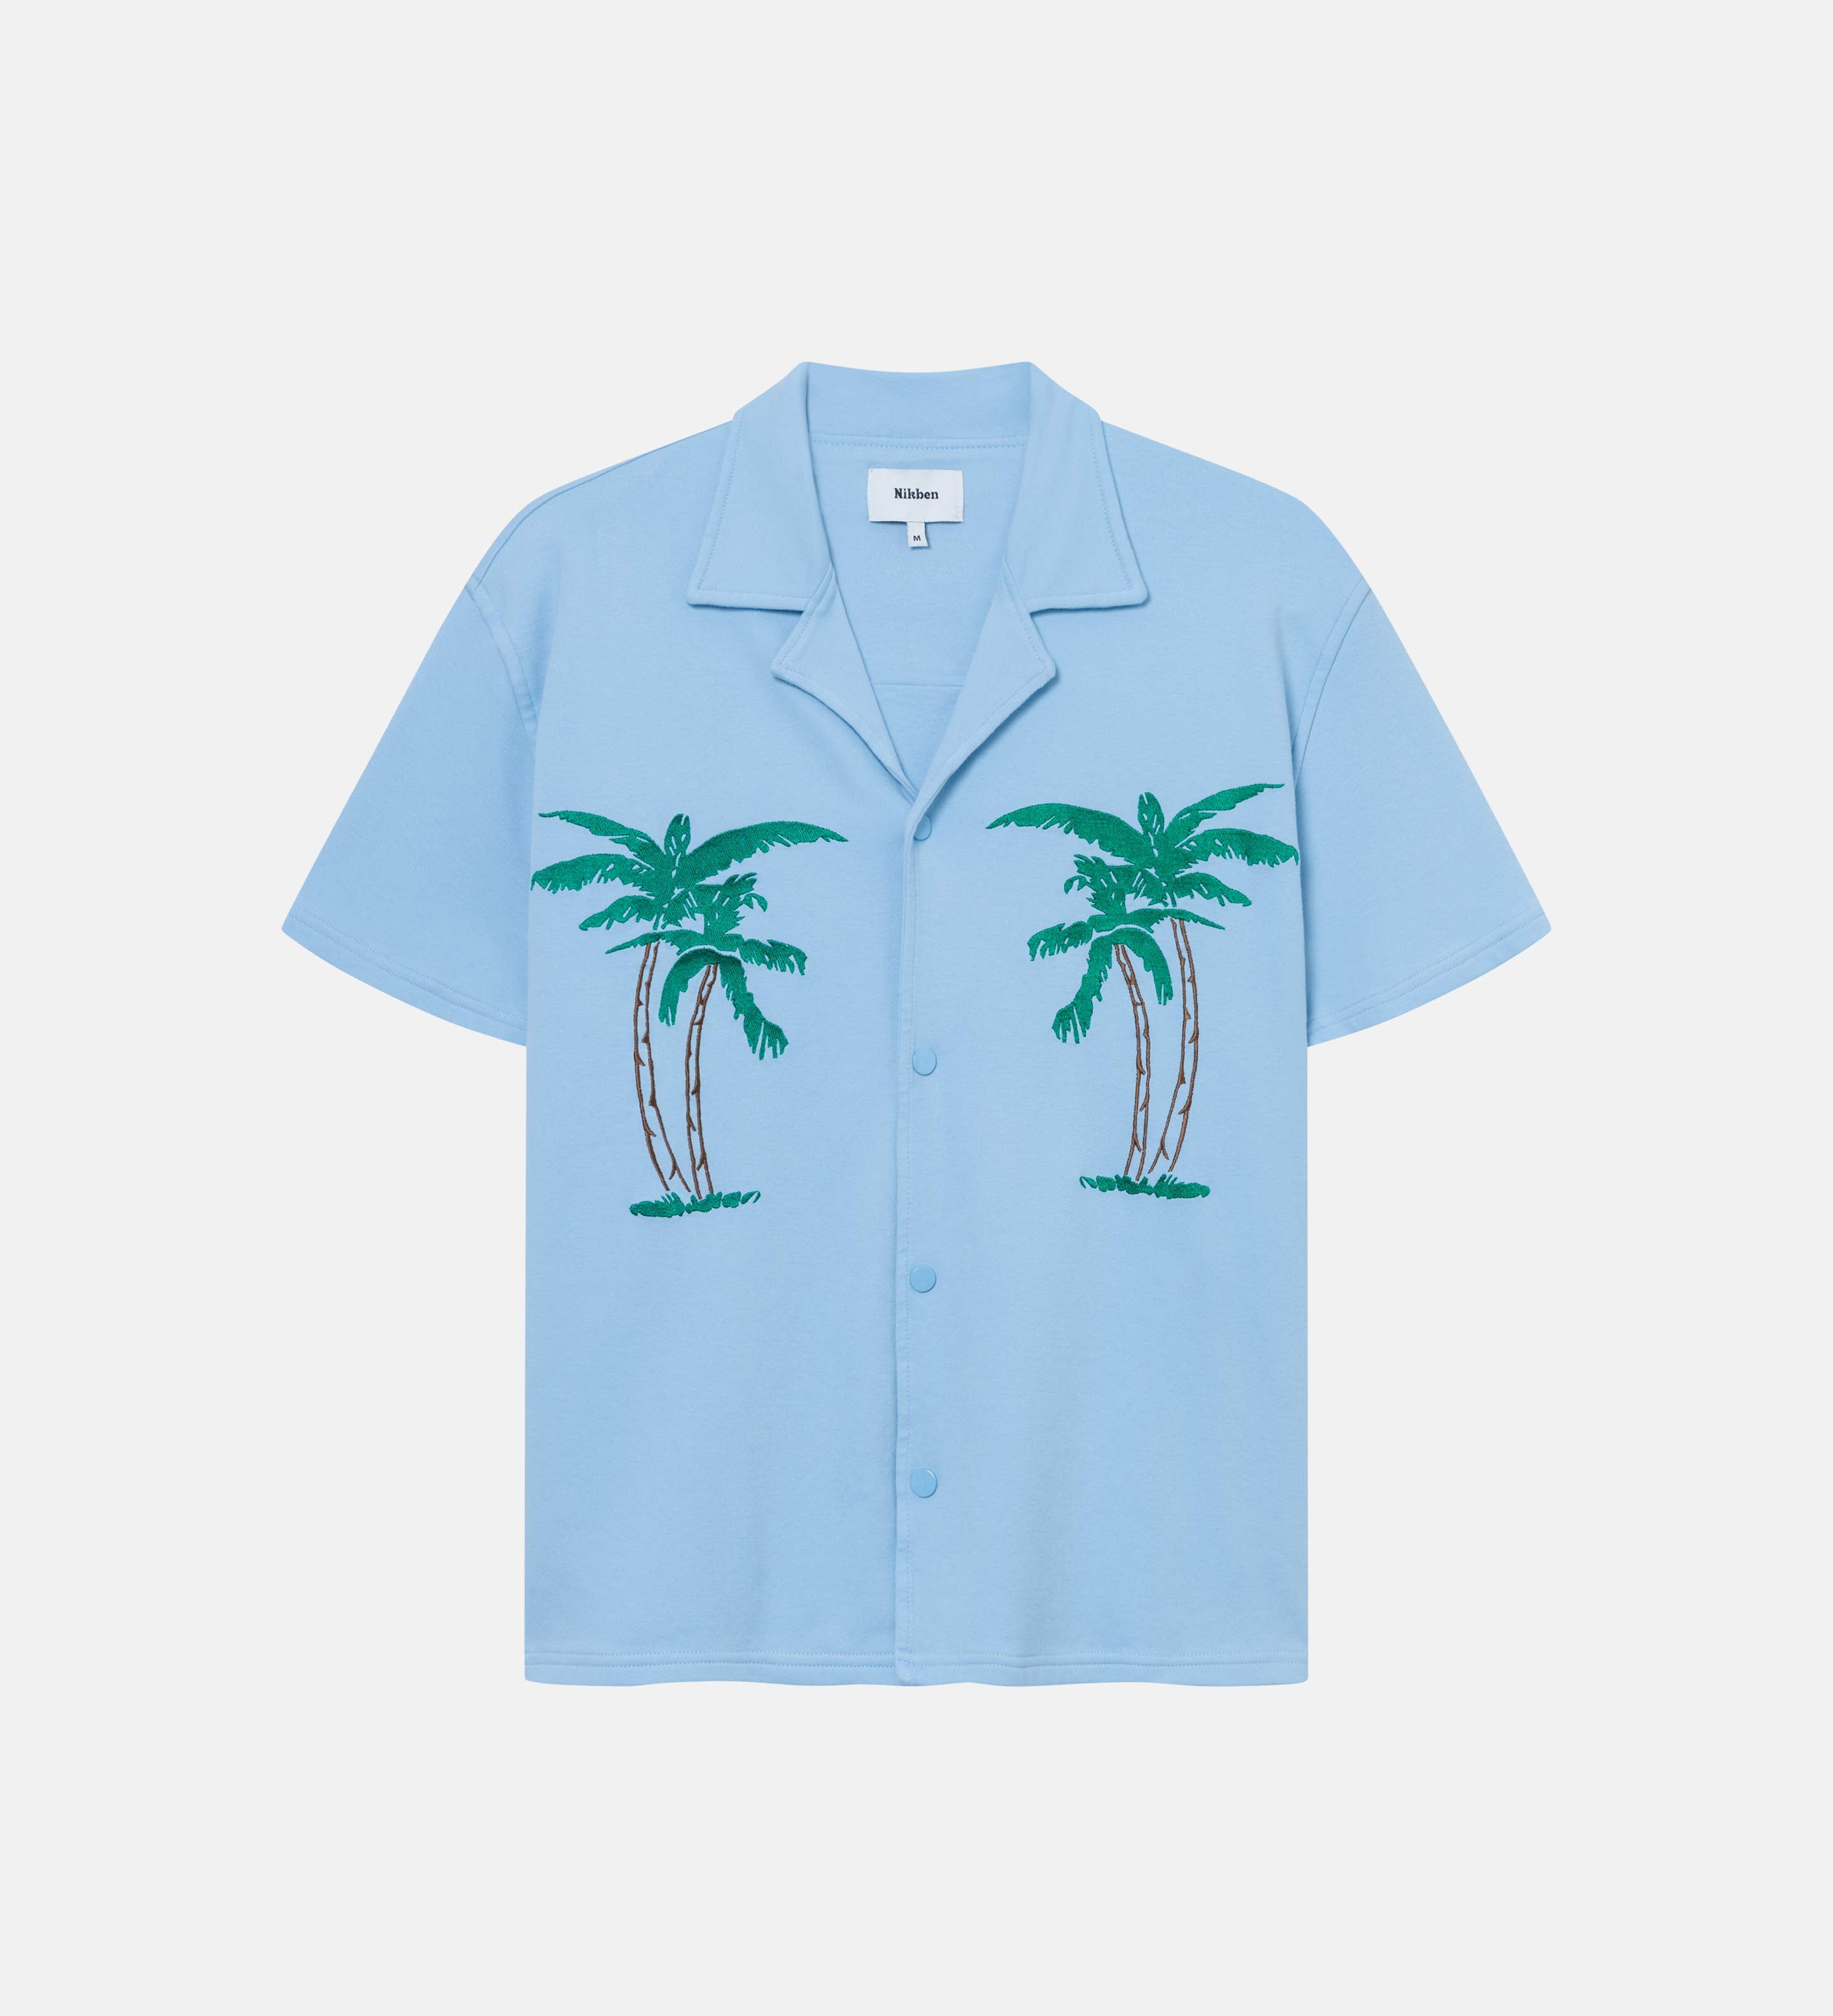 Sky blue short-sleeved shirt with palm tree embroidery